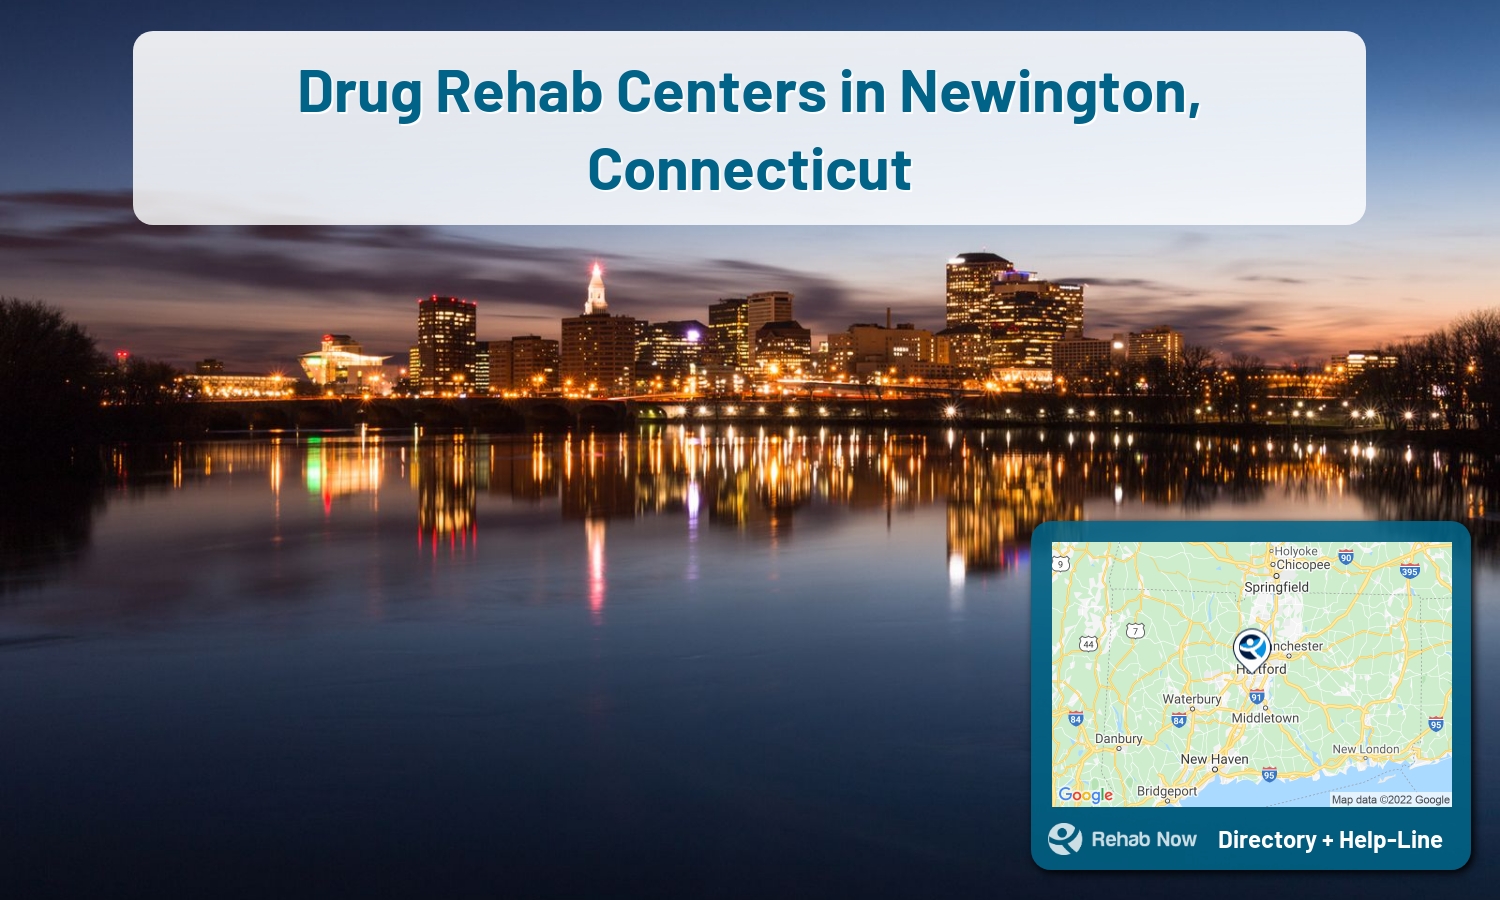 Our experts can help you find treatment now in Newington, Connecticut. We list drug rehab and alcohol centers in Connecticut.